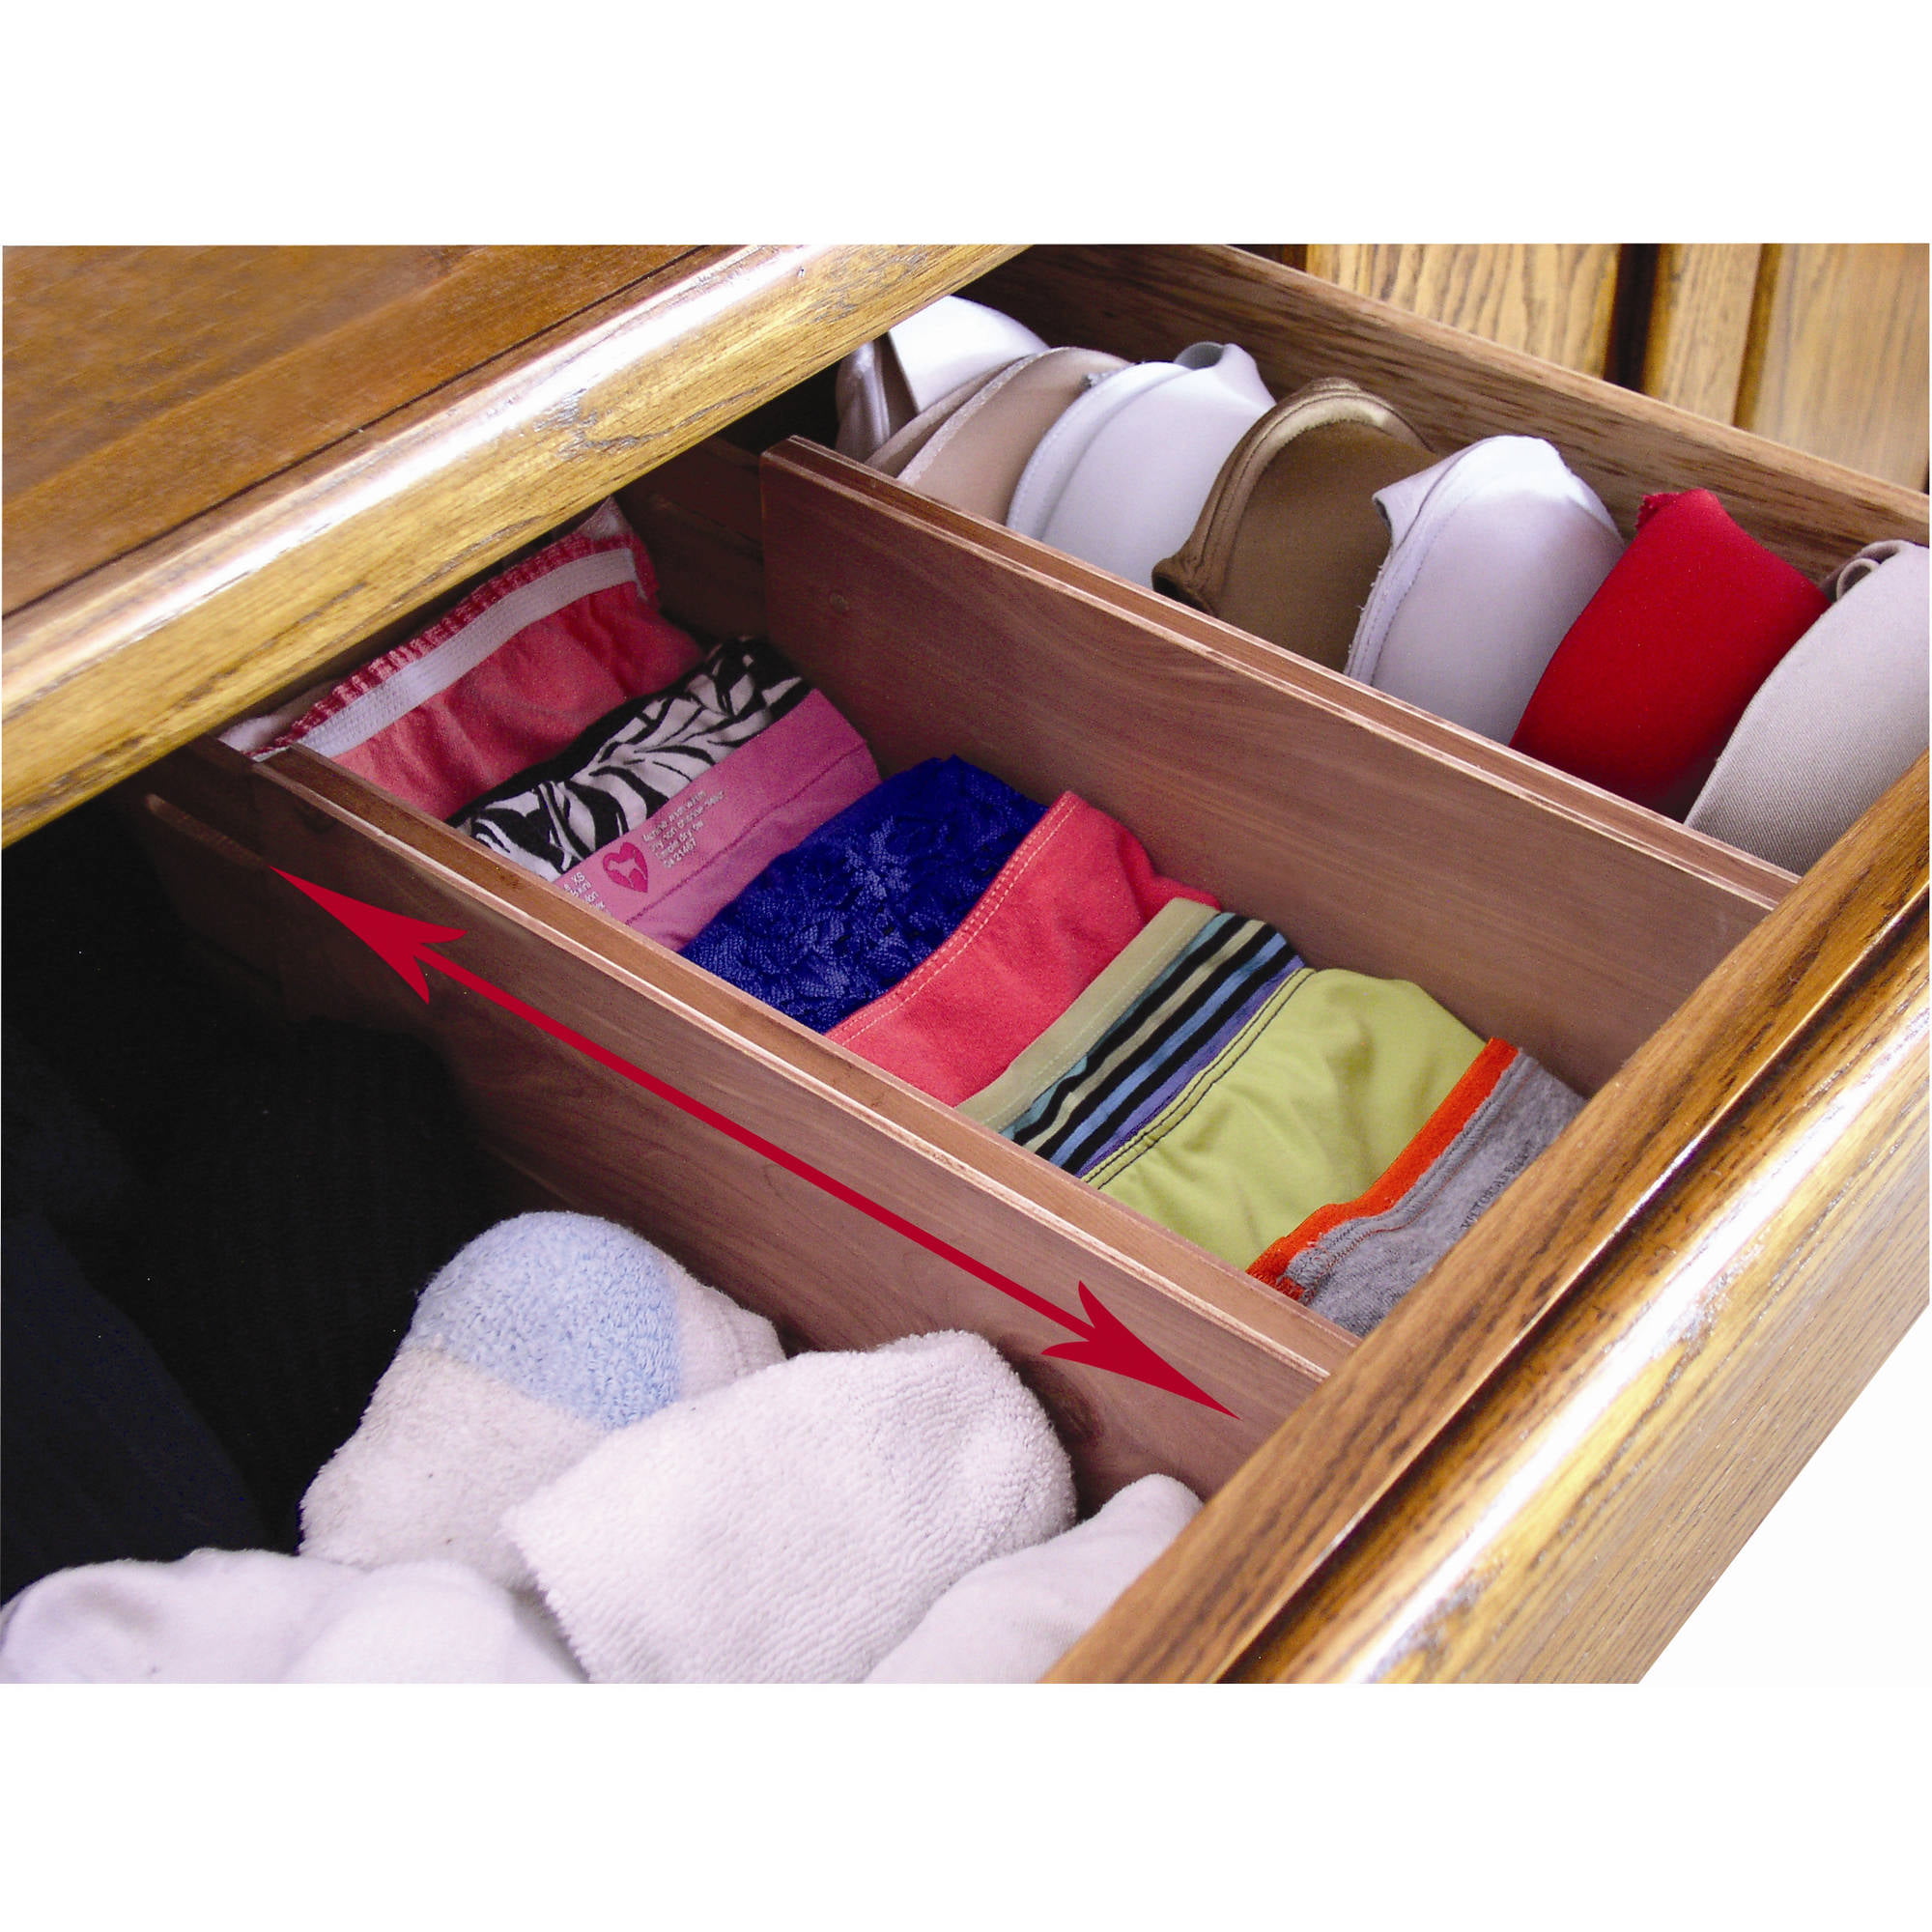 Axis International Marketing Adjustable /& Expandable Drawer Dividers and Organizers for Household Storage Red Wood Cedar 2 Pack